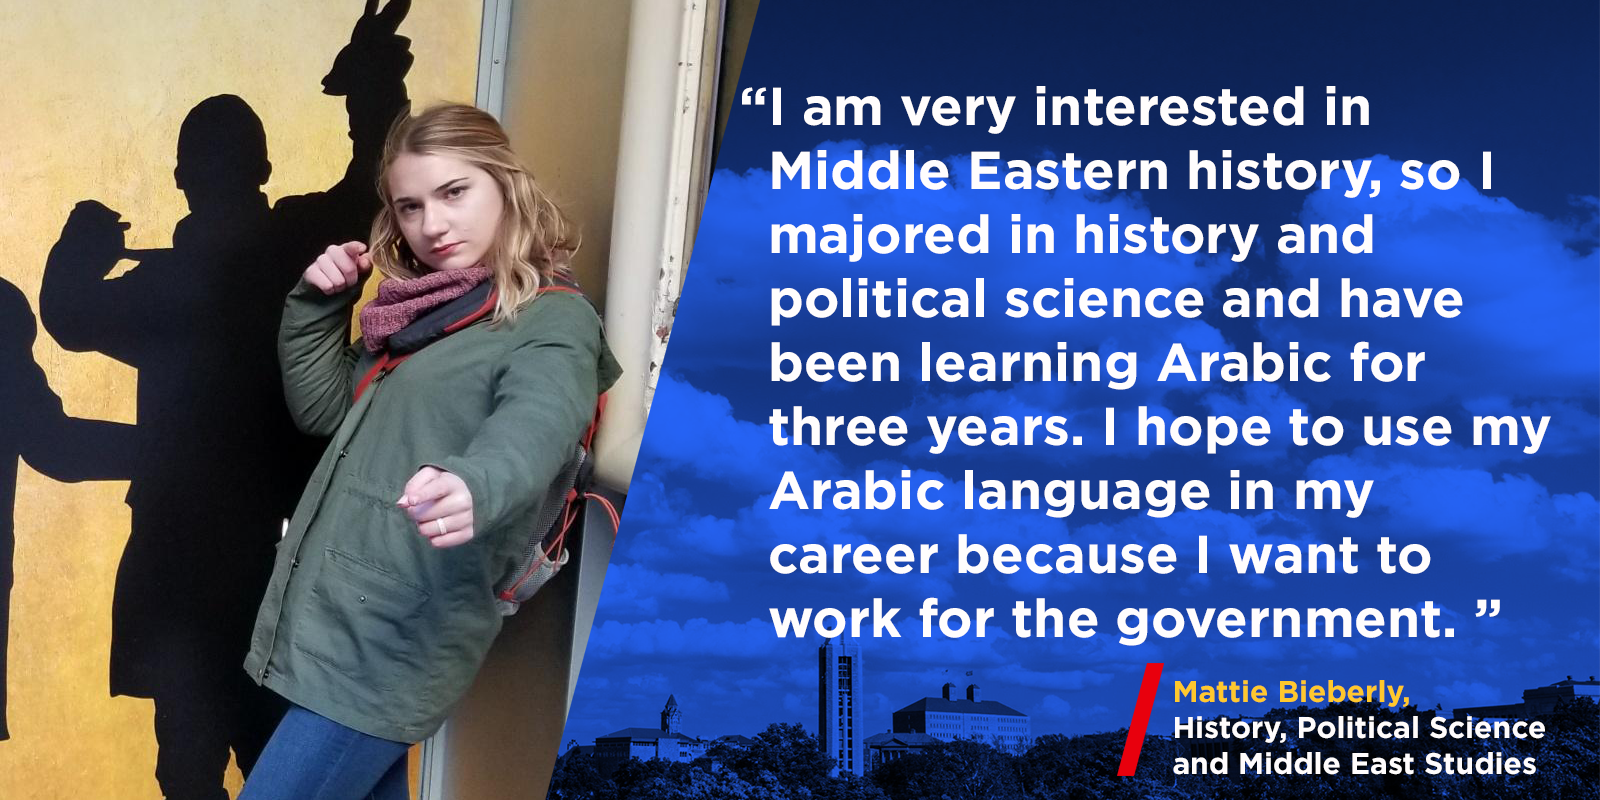 "I am very interested in Middle Eastern history, so I majored in history and political science and have been learning Arabic for three years. I hope to use my Arabic language in my career because I want to work for the government."